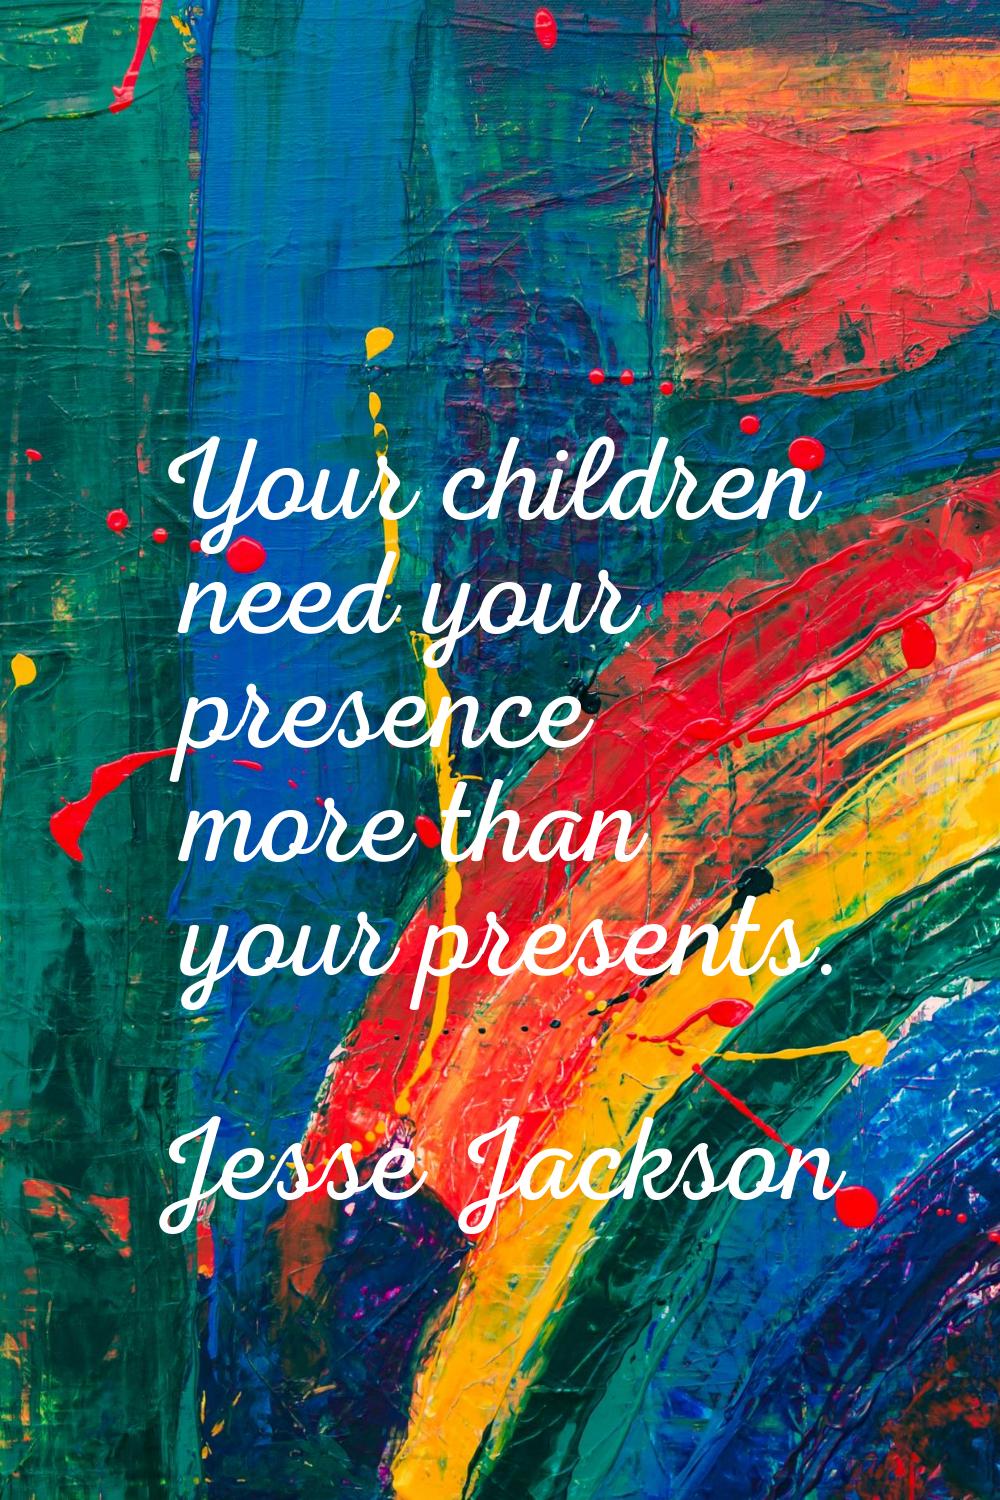 Your children need your presence more than your presents.